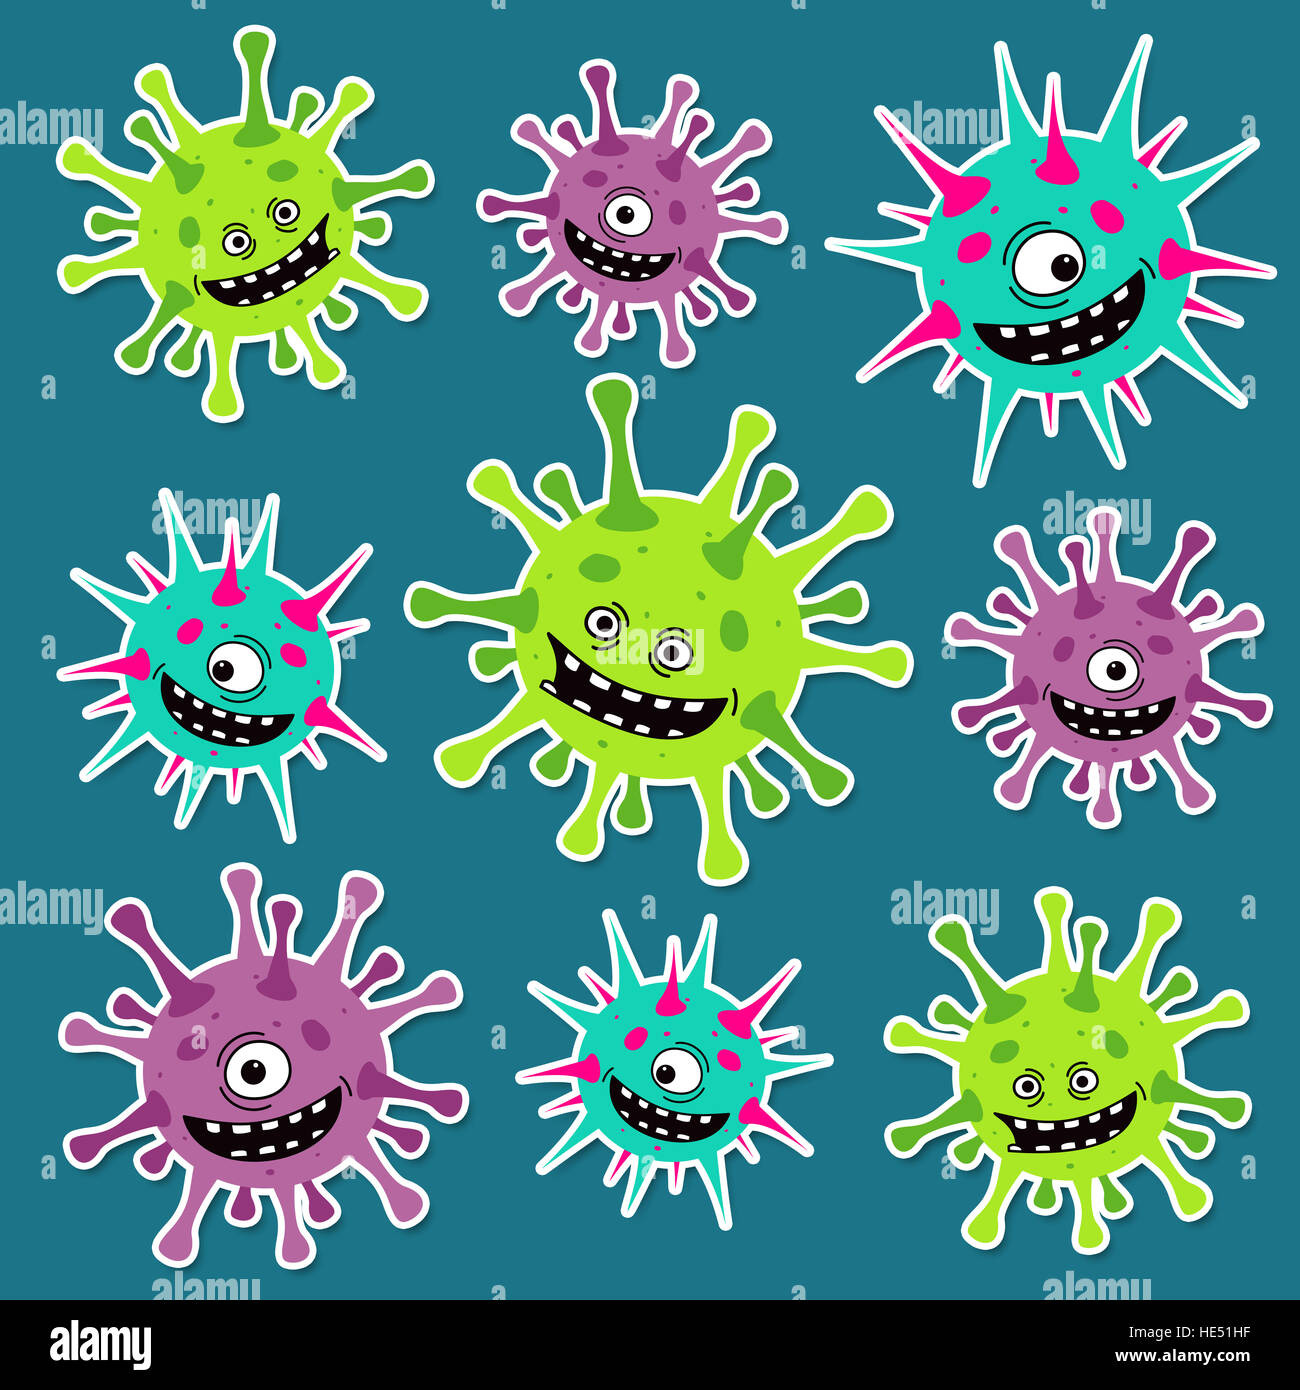 Cartoon viruses, germs or bacteria pattern. Funny colorful set of stickers on blue background ...